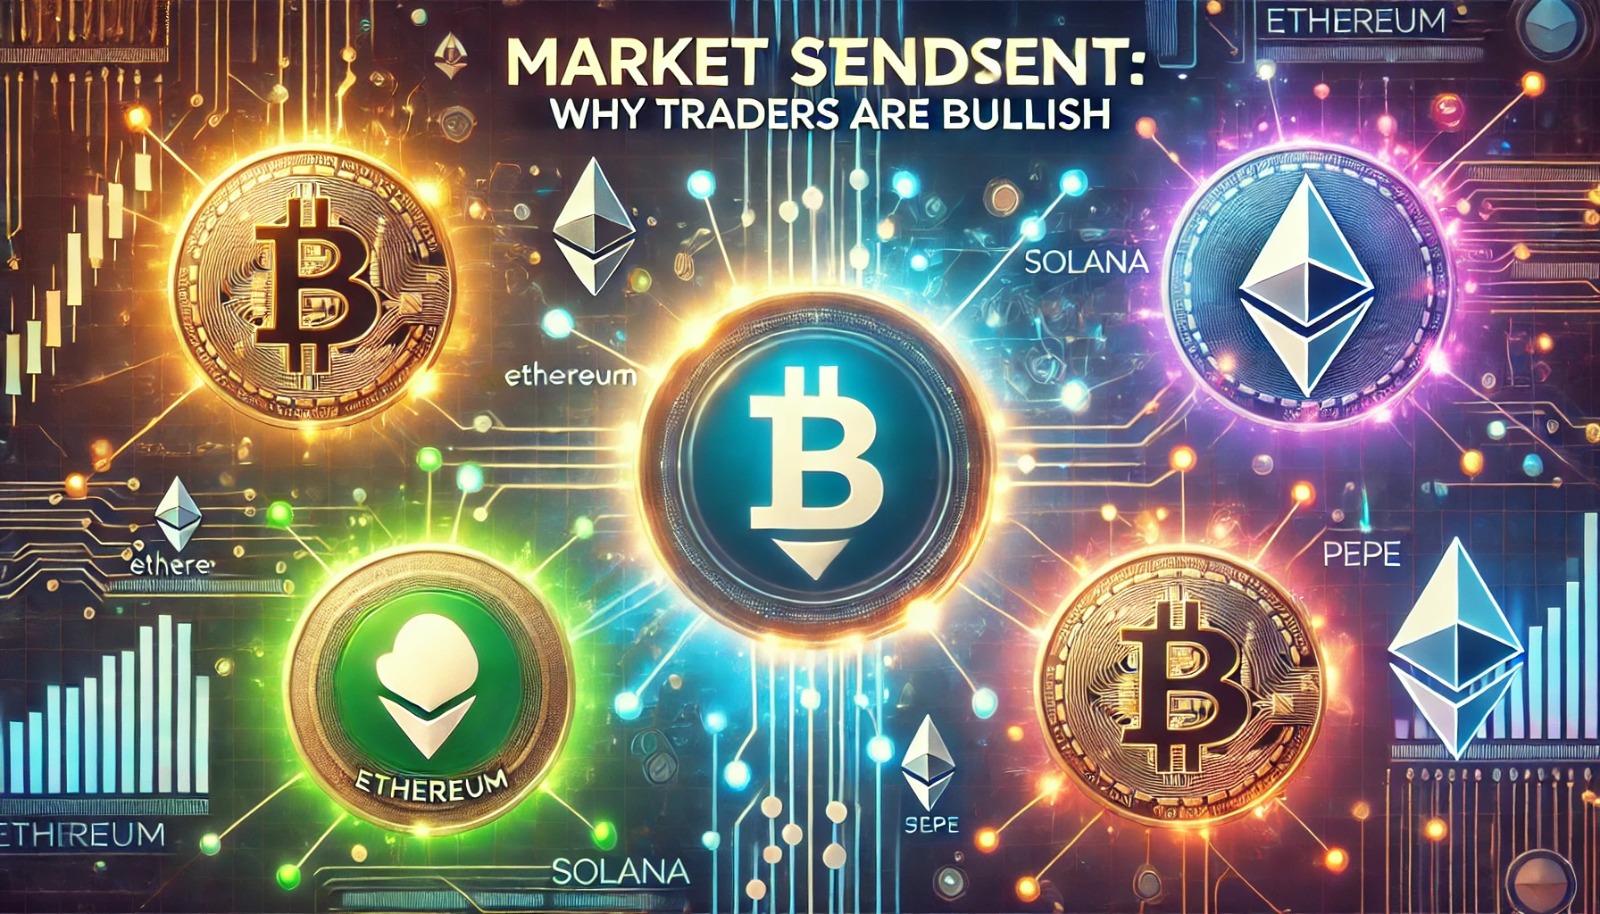 Market Sentiment: Why Traders Are Bullish on Bitgert, Bitcoin, Ethereum, Solana, and PEPE